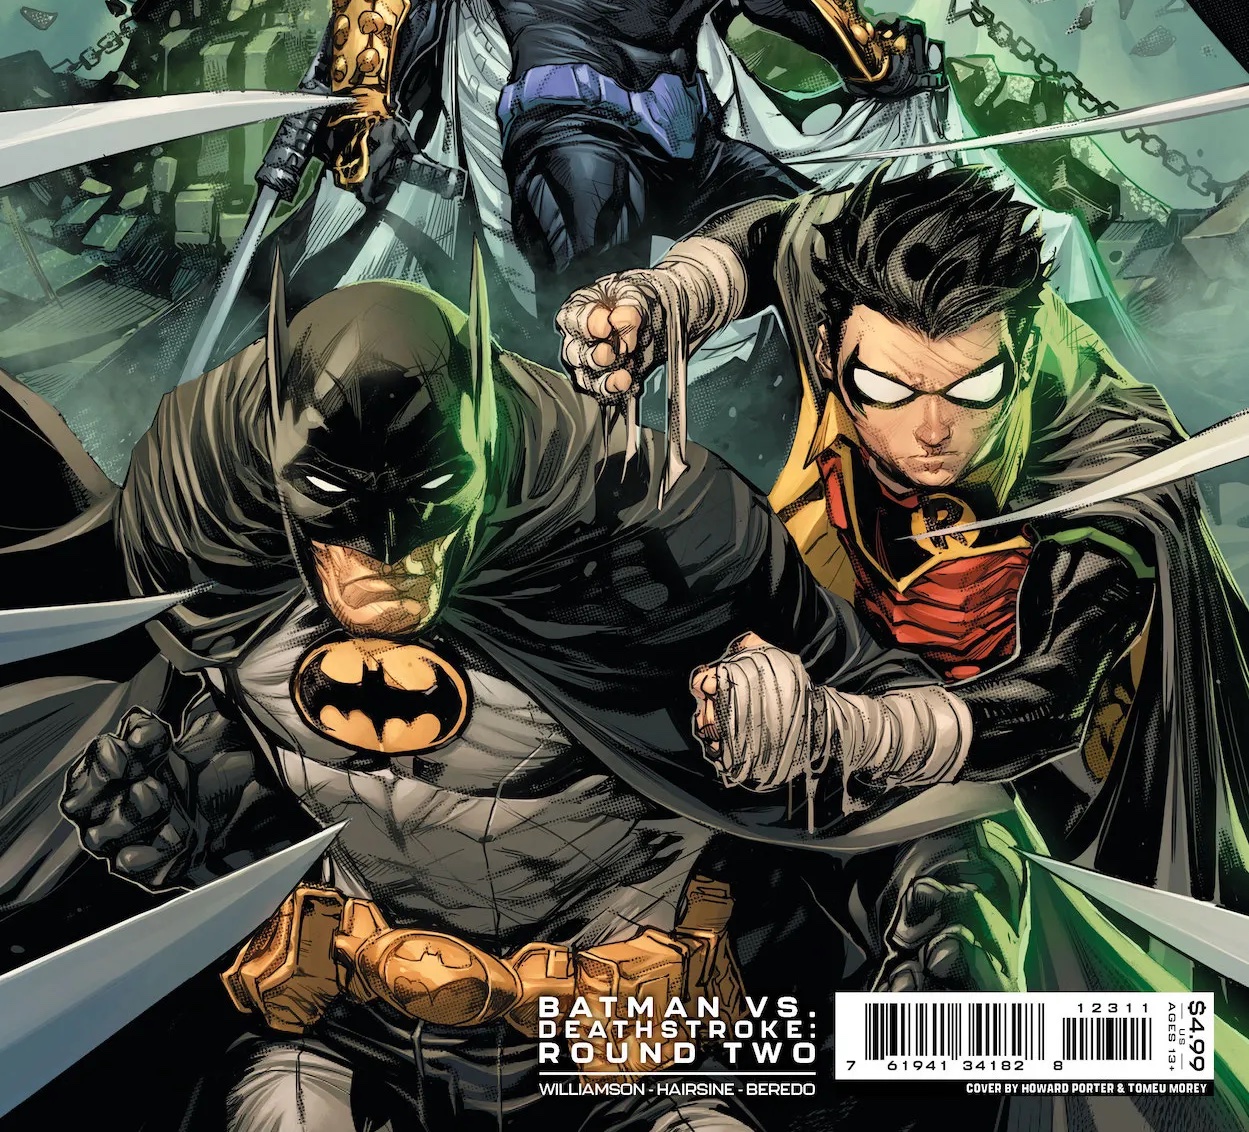 'Batman' #123 features detective work and tons of action